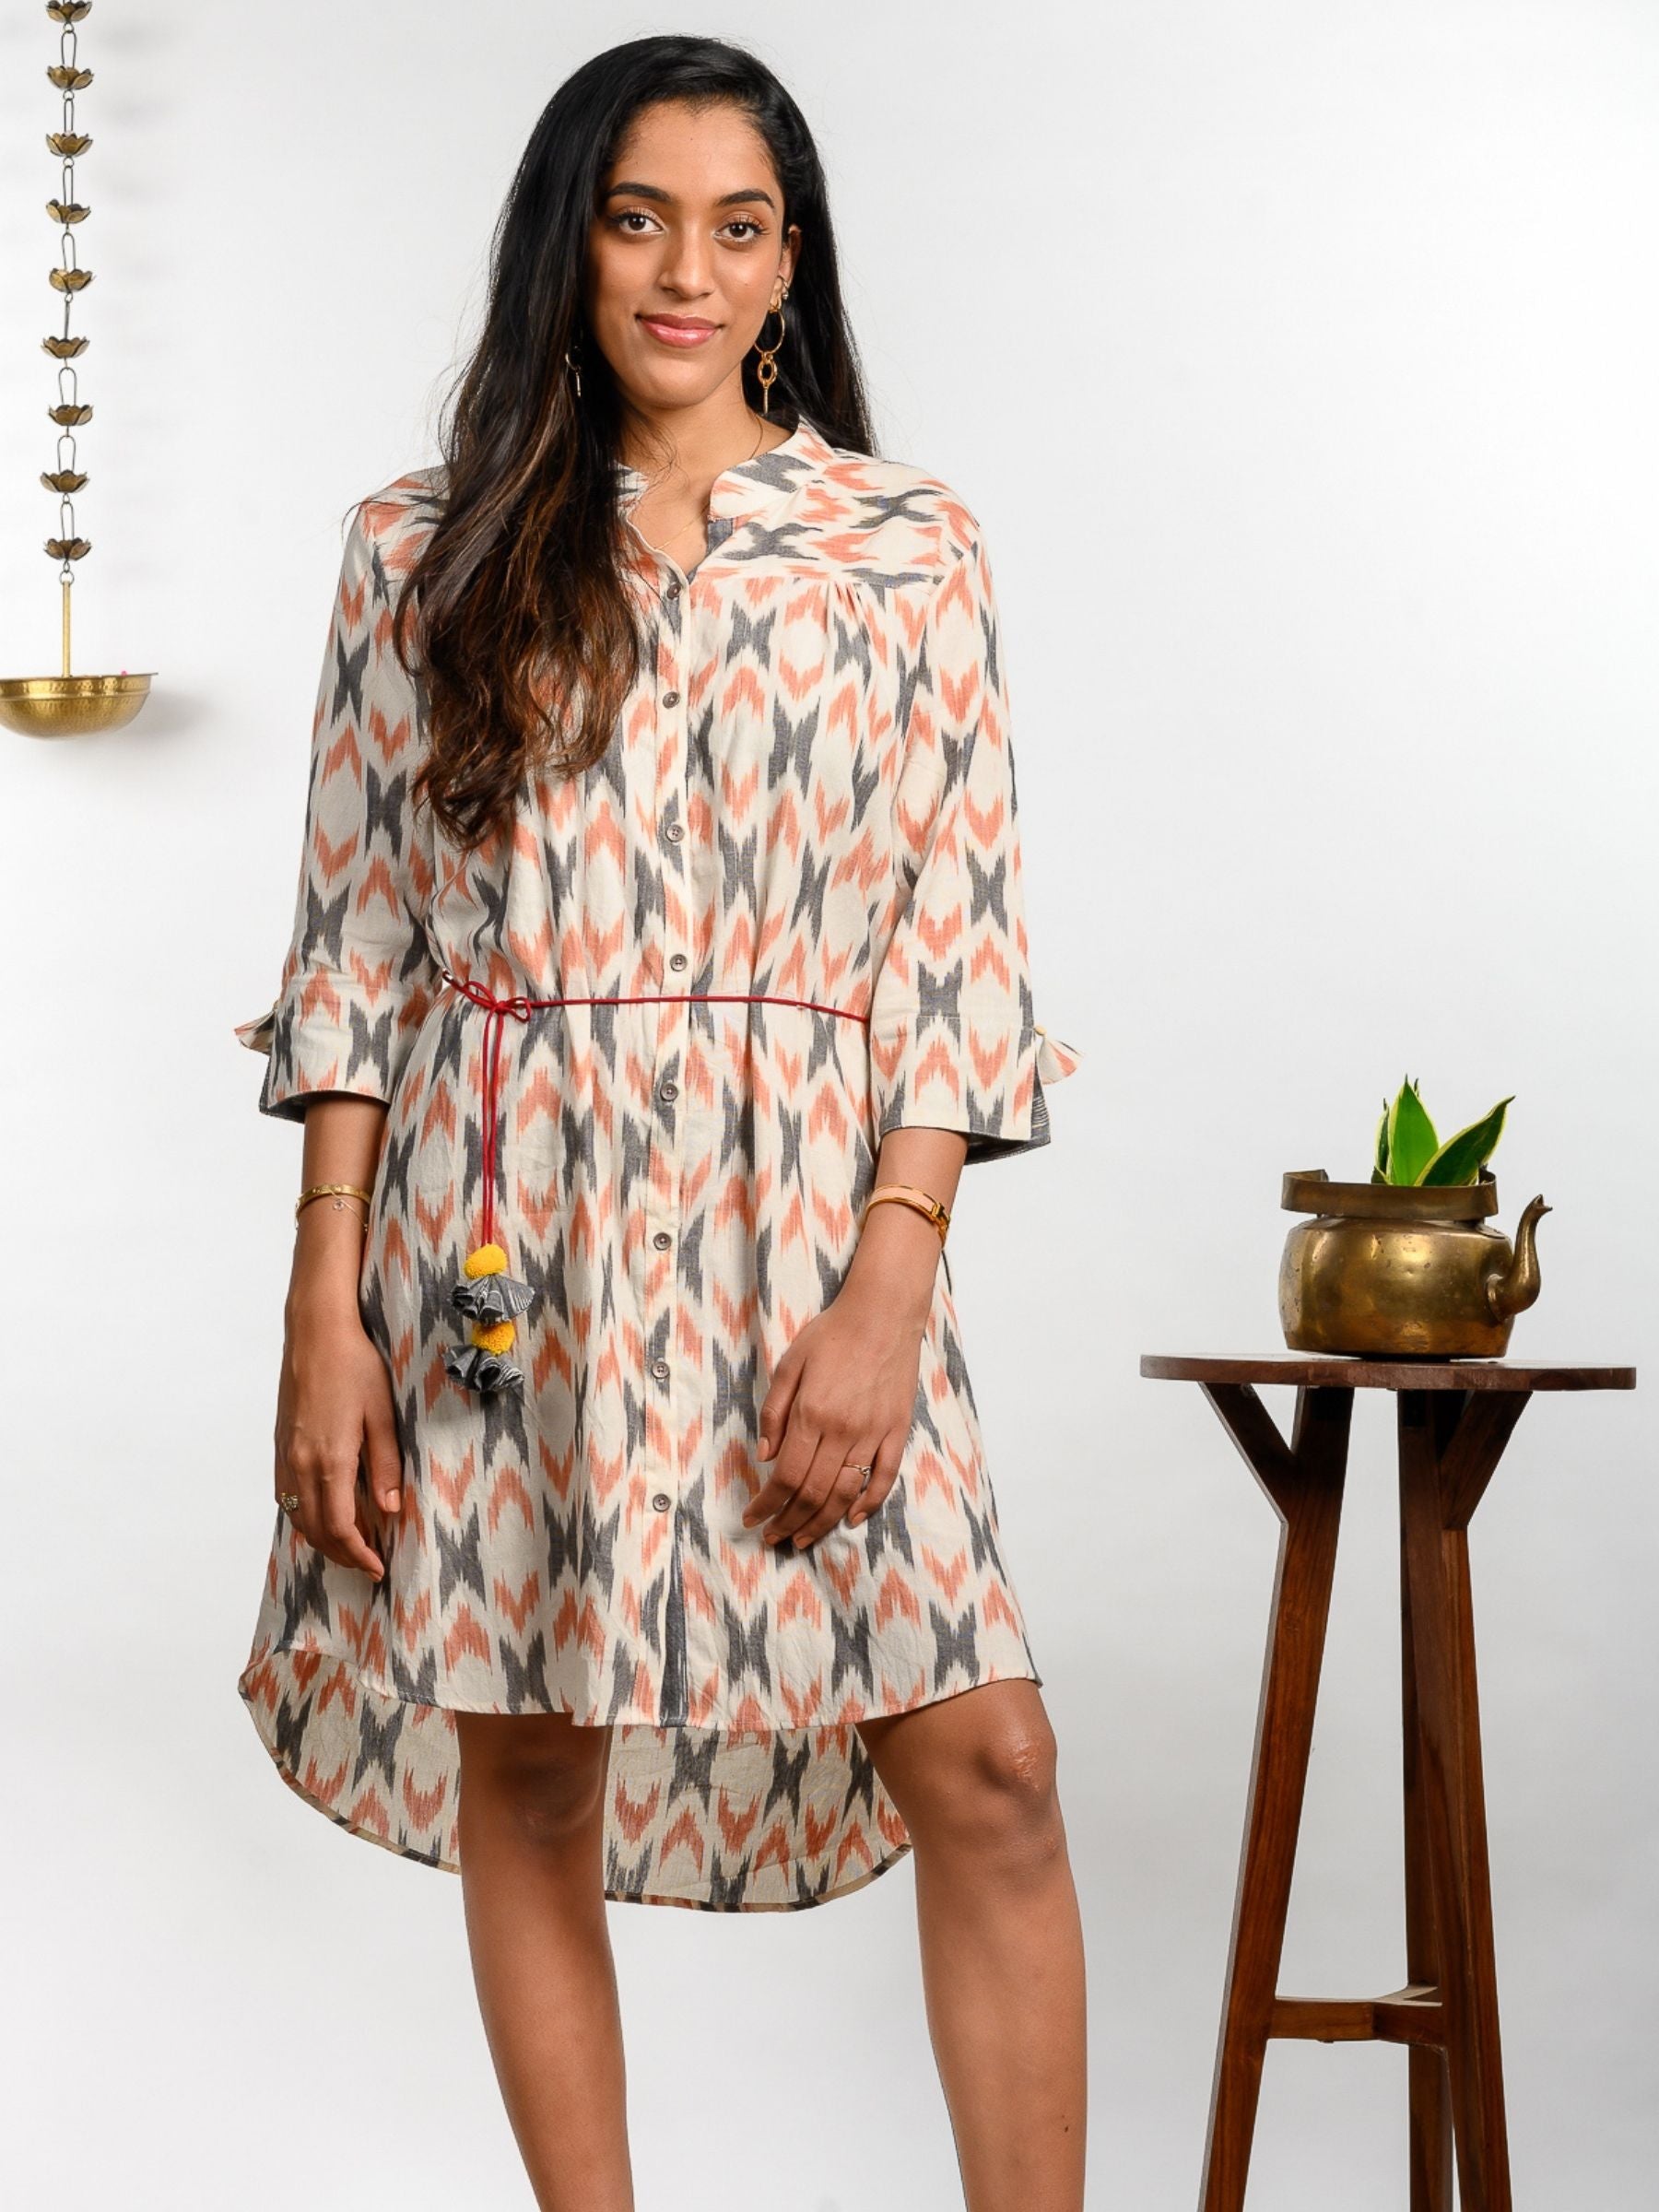 Shae by SASSAFRAS Fuchsia & Peach-Coloured Ikat Printed Layered Midi Dress  Price in India, Full Specifications & Offers | DTashion.com